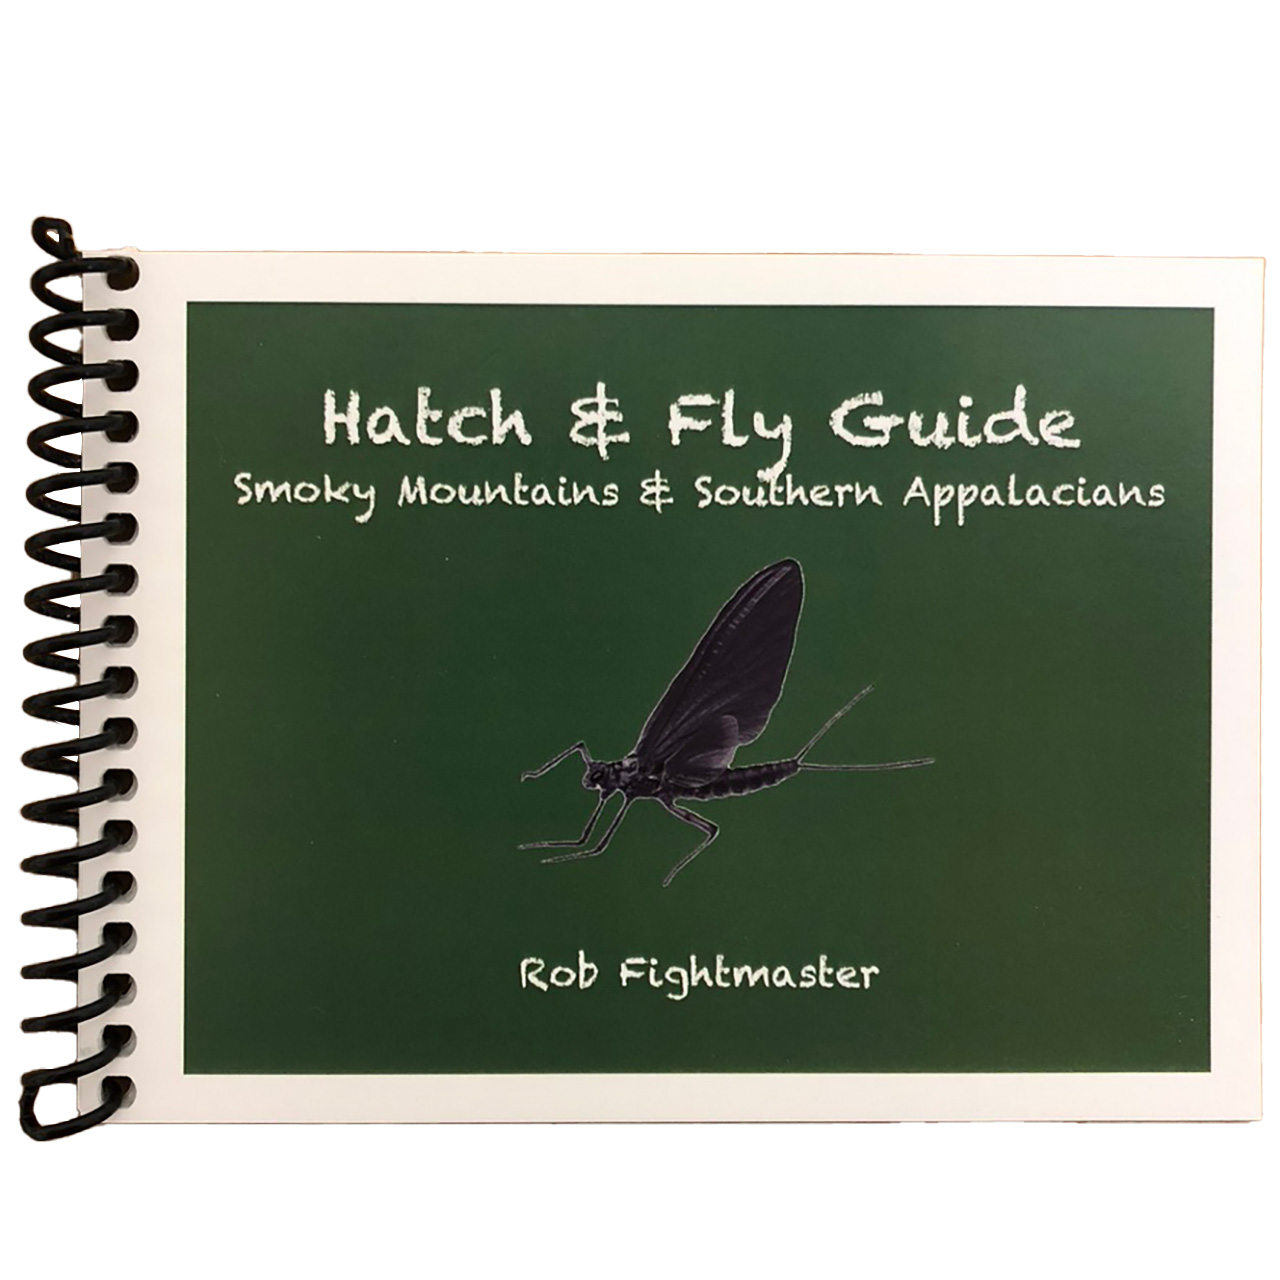 Hatch and Fly Guide to the Great Smoky Mountains National Park